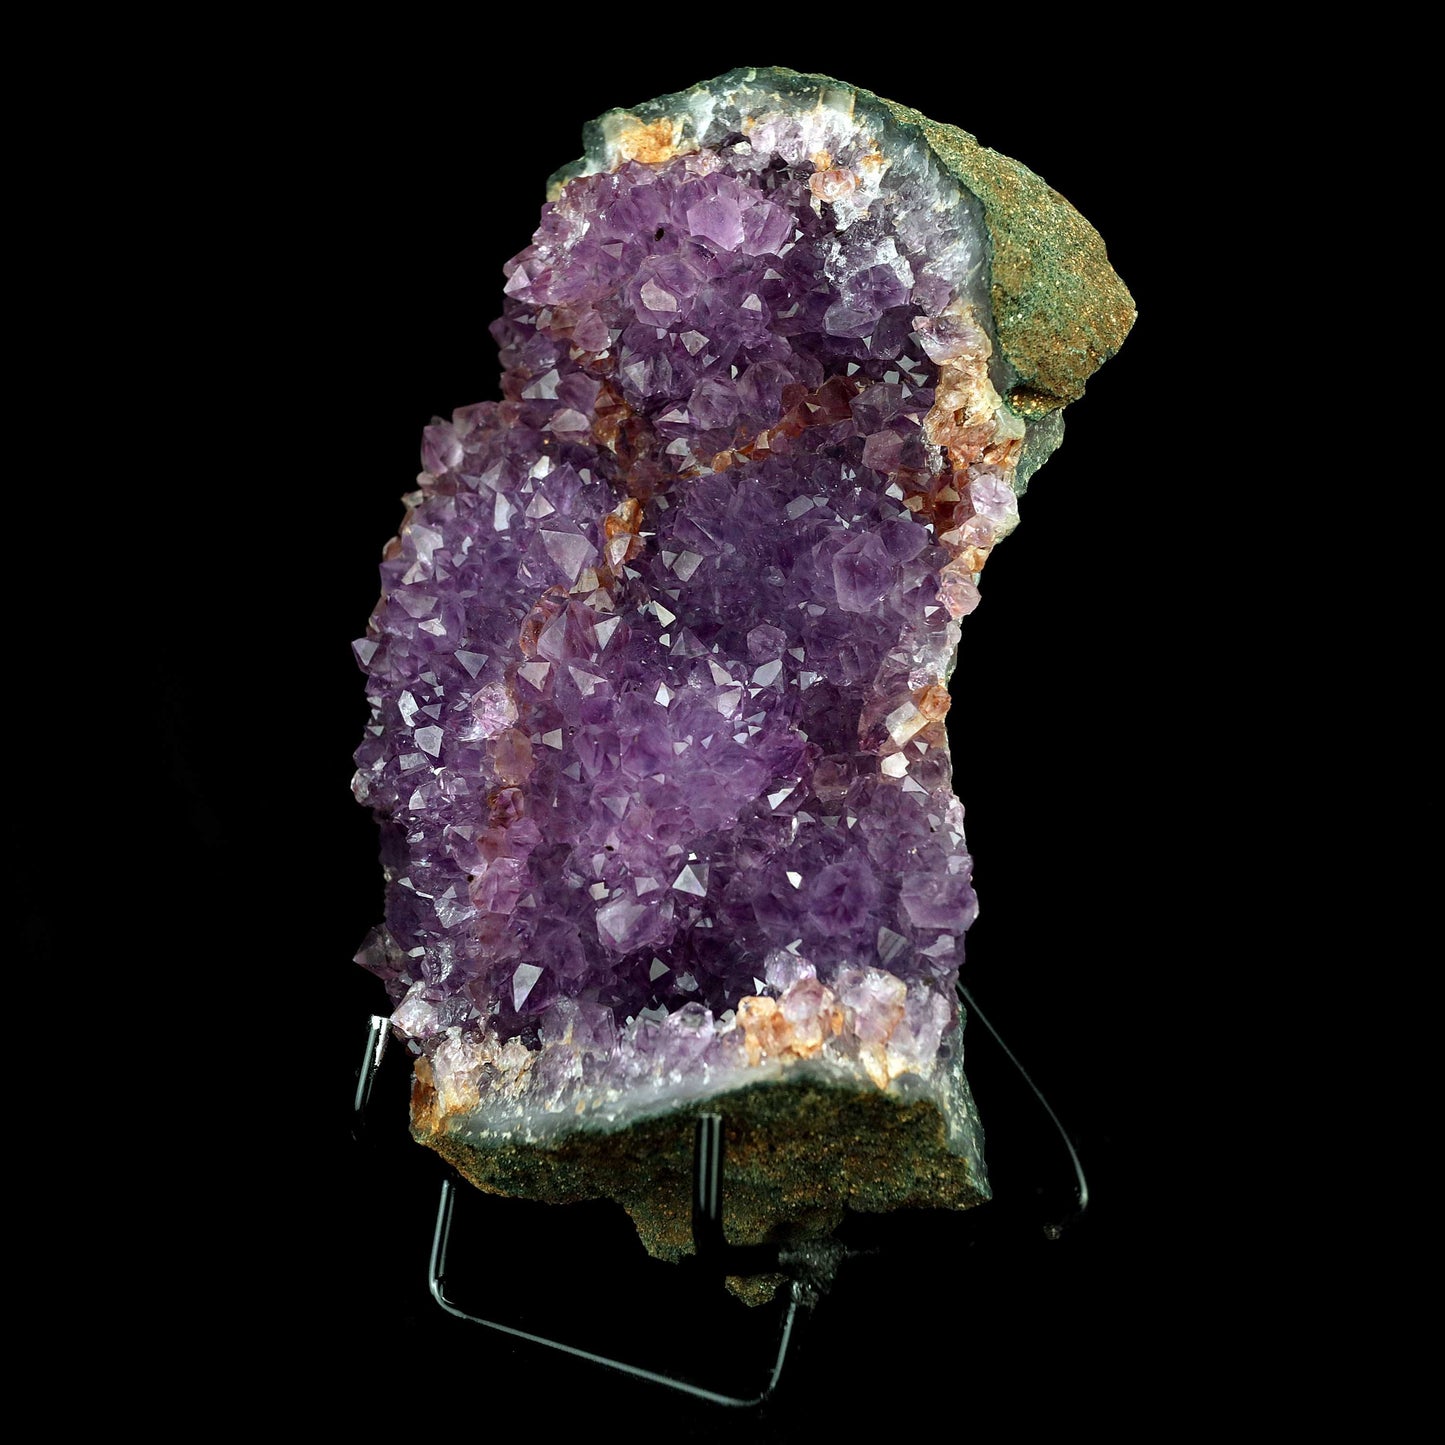 Amethyst Big Cluster Natural Mineral Specimen # B 4333  https://www.superbminerals.us/products/amethyst-big-cluster-natural-mineral-specimen-b-4333  Features:A very large Amethyst Cluster, hosting lustrous, deep-purple Amethyst crystals. The intense, rich color and luster of the Amethyst is stunning. I picked this piece up not only because of its color and luster, but because of its unique and asymmetrical shape. It stood out among the hundreds of identically